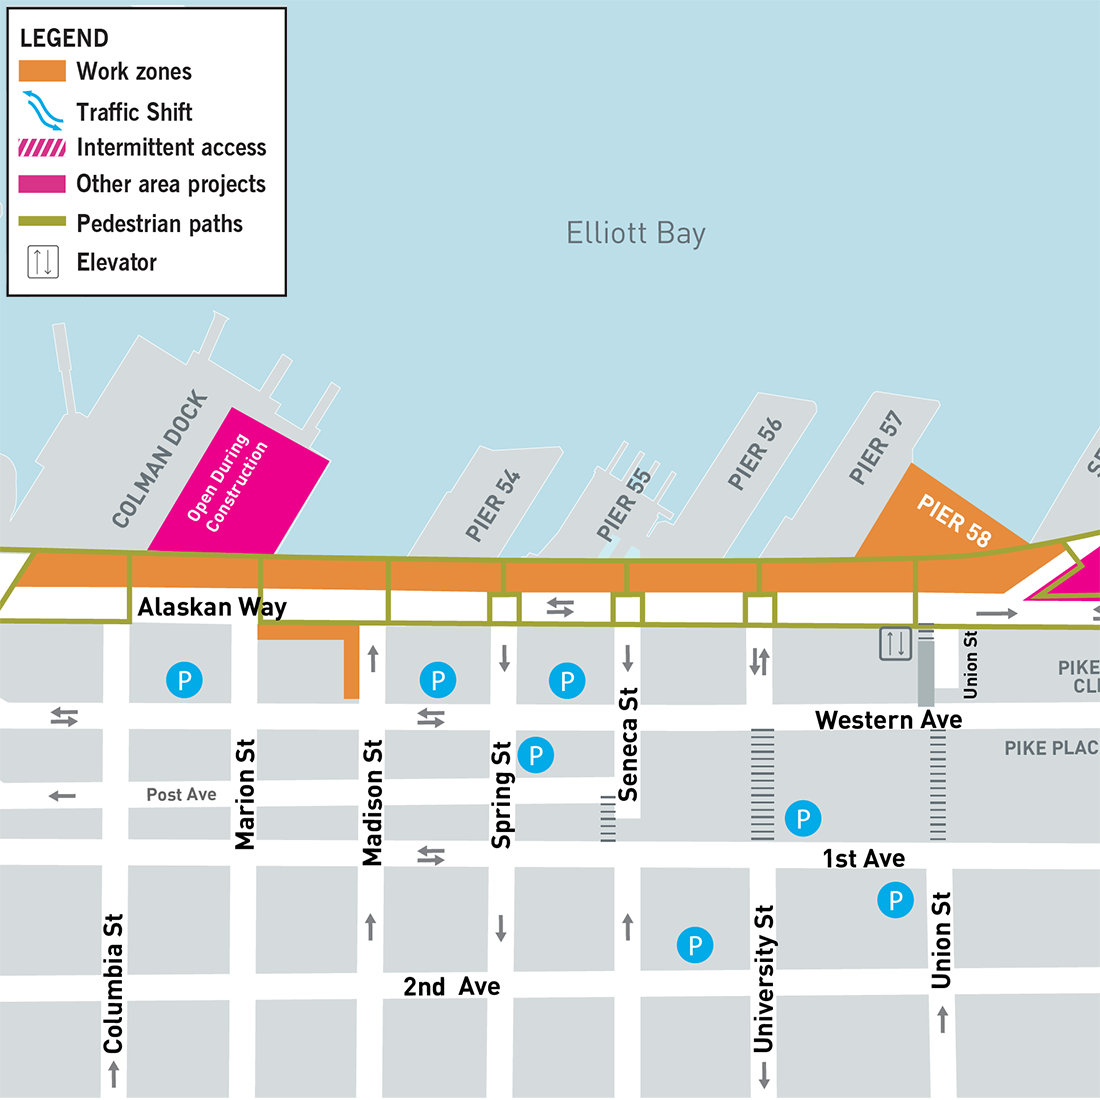 Map showing construction work zones between Columbia and Pike streets on the waterfront. Between Columbia and Union streets the work zone is on the west side. On the east side of Alaskan Way there is a work zone between Columbia and Marion streets and on the south side of Marion St. There is a work zone at Union St between Alaskan Way and Western Ave. North of Union St traffic shifts from the east side of the road to the west side of the road. Between Union and Pike streets the work zone is on the east side of the road.